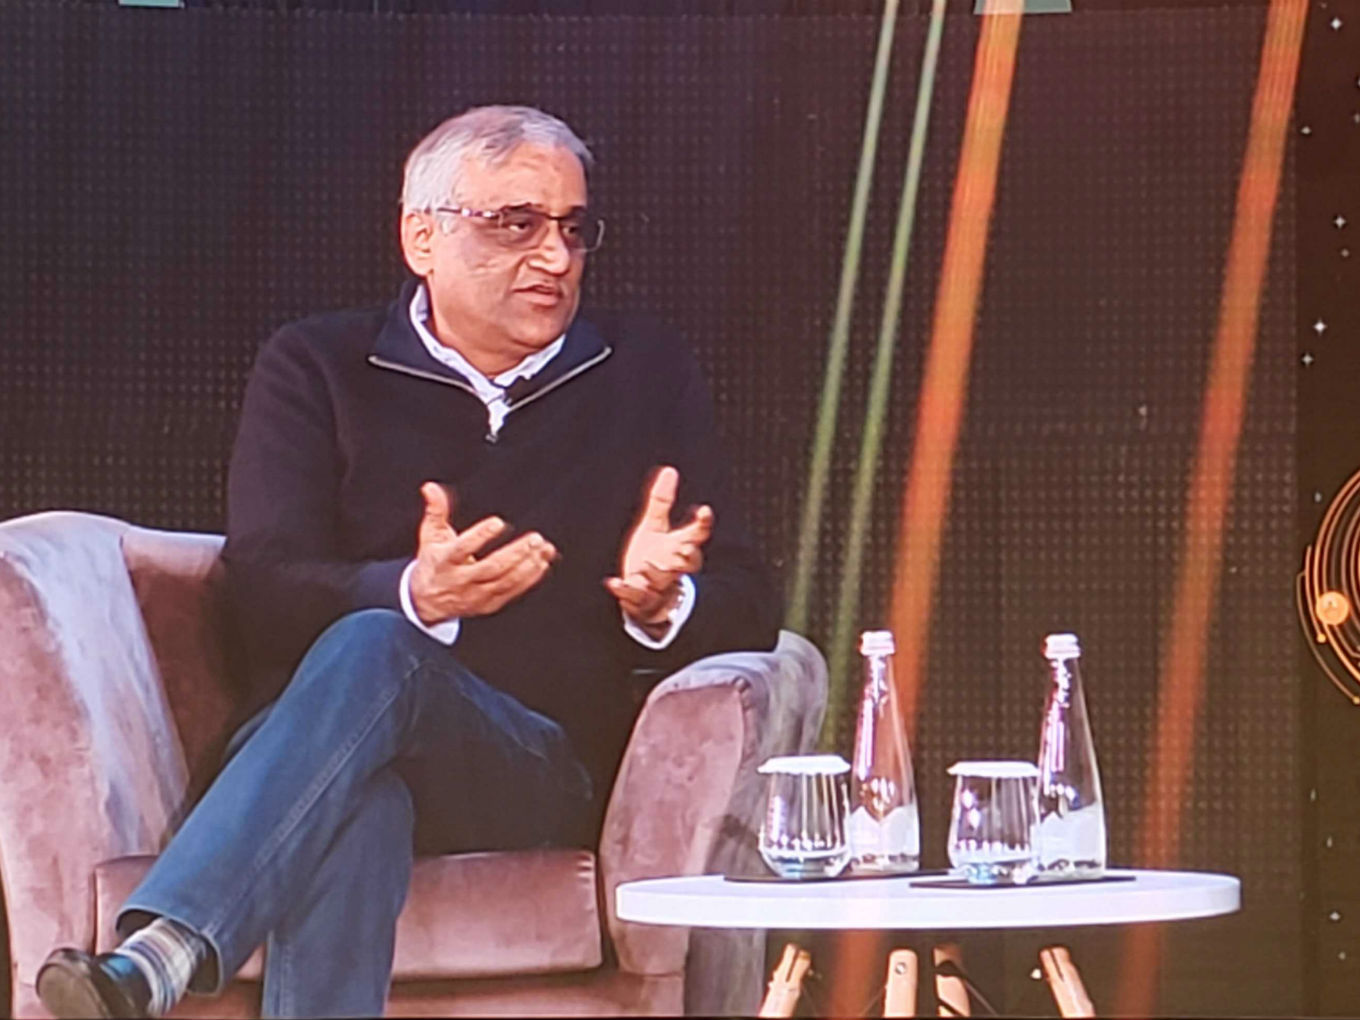 Kishore Biyani's Advice To Startups: Look At The ‘Canvas’ And Grow Accordingly